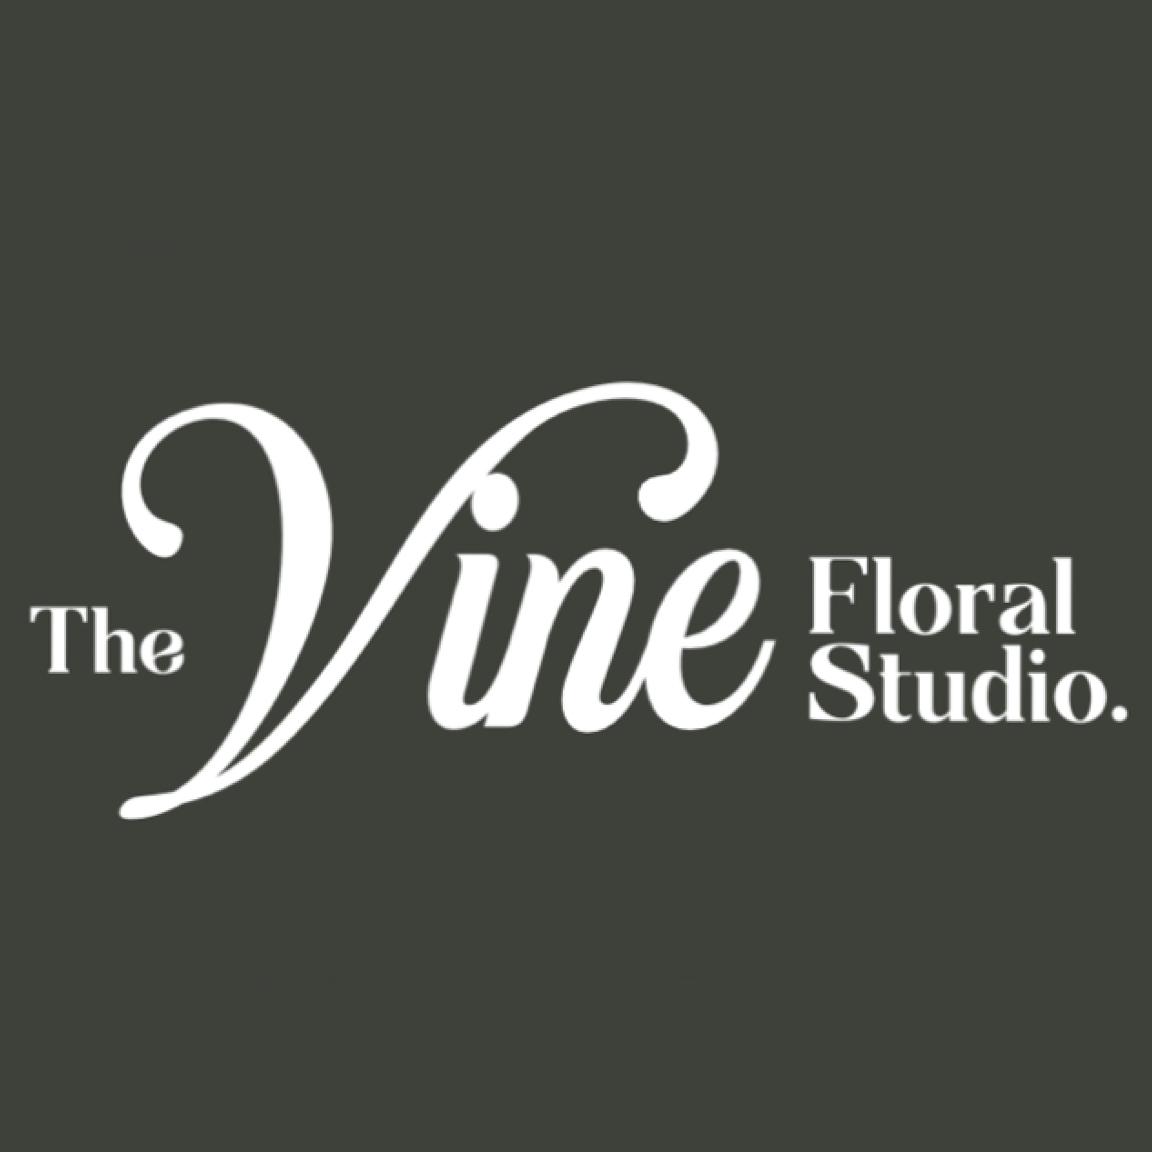 TheVineFloral